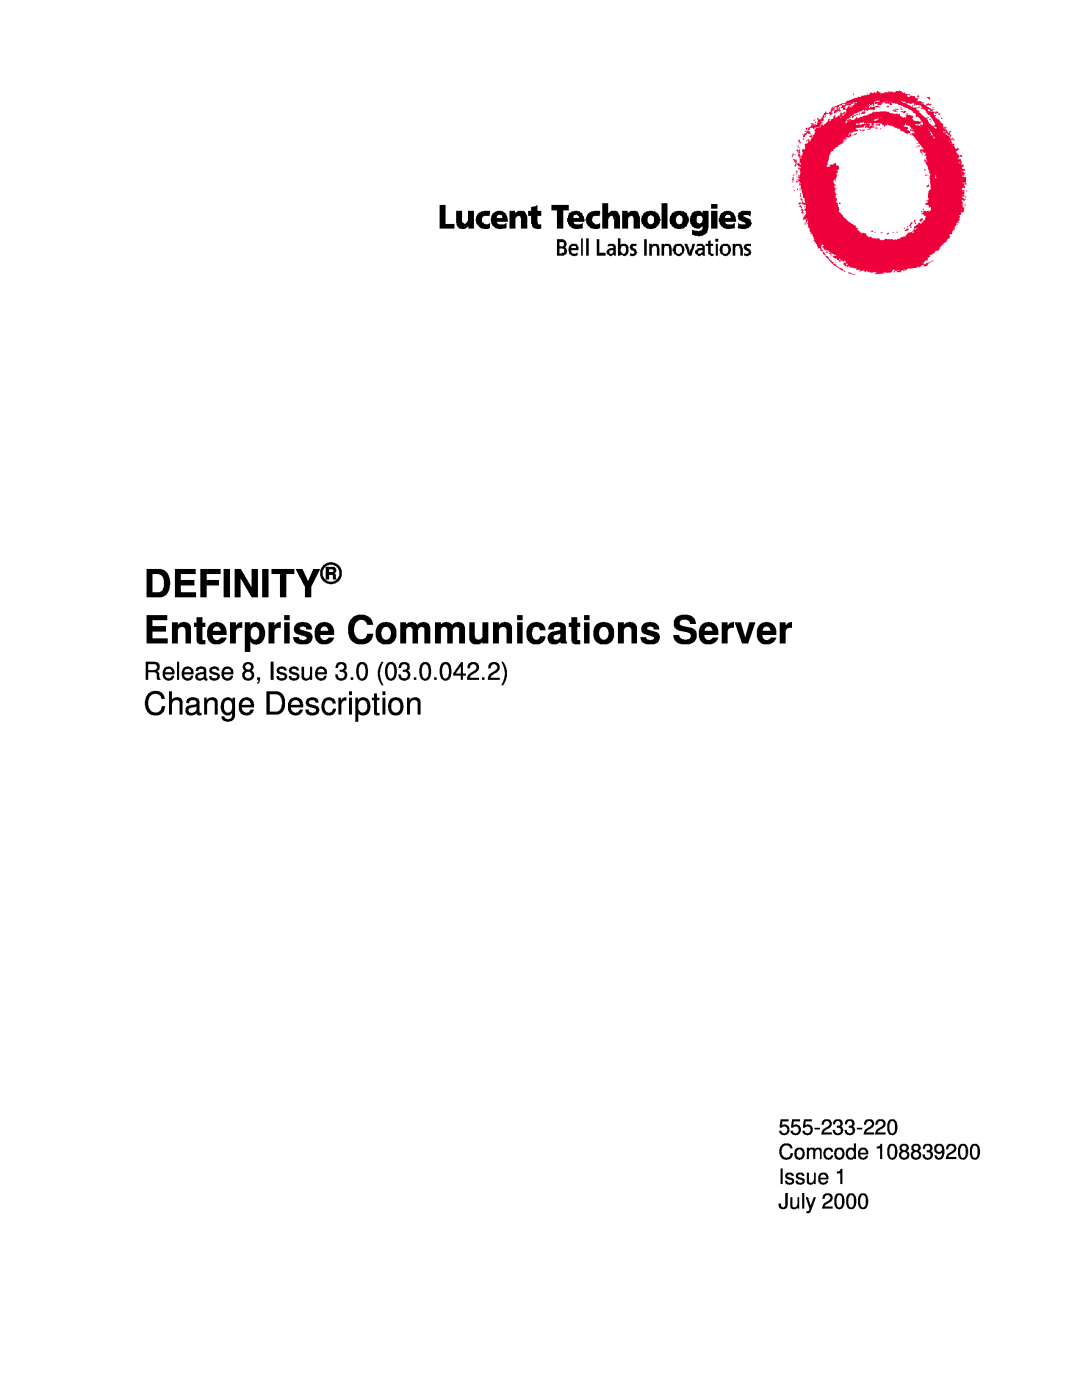 Lucent Technologies 03.0.042.2 manual Comcode 108839200 Issue July, DEFINITY Enterprise Communications Server 